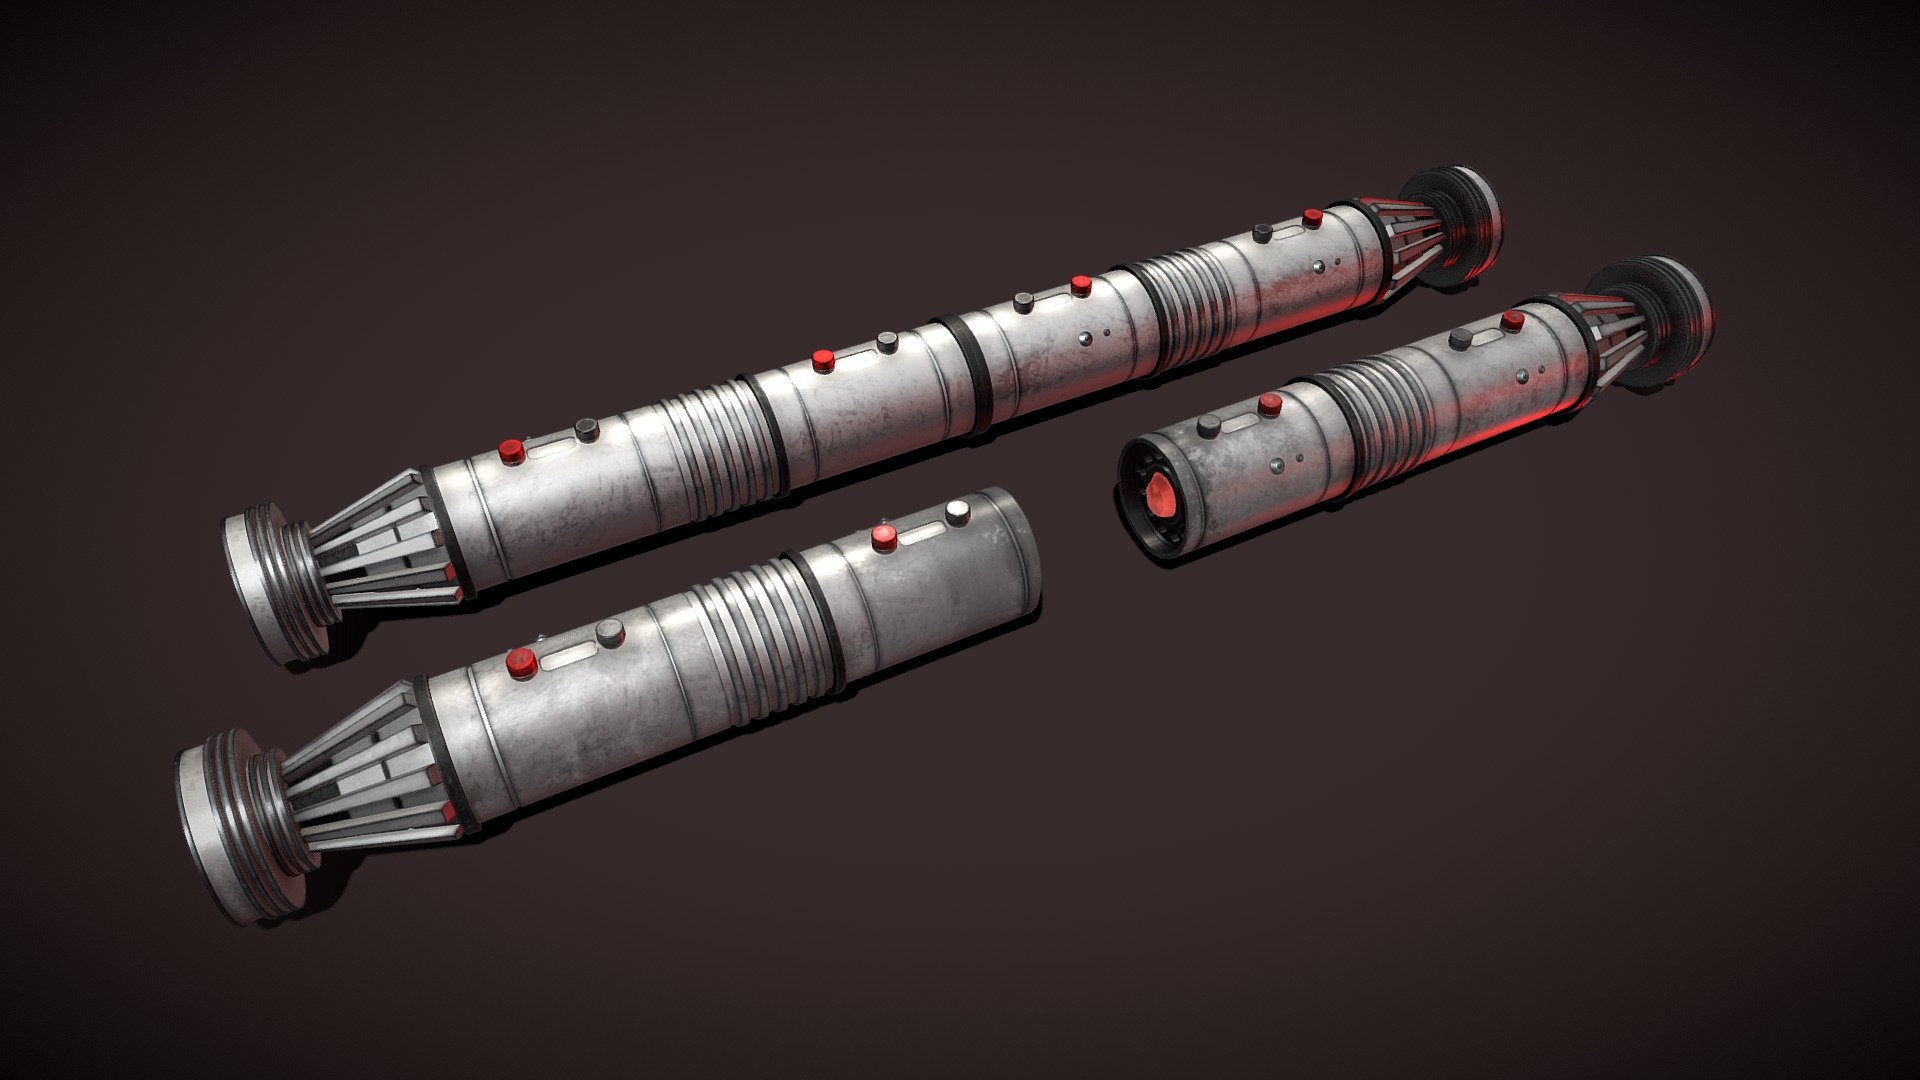 Model of Darth Maul's Lightsaber from Star Wars made in about 2hrs using Maya and Substance Painter 3d model